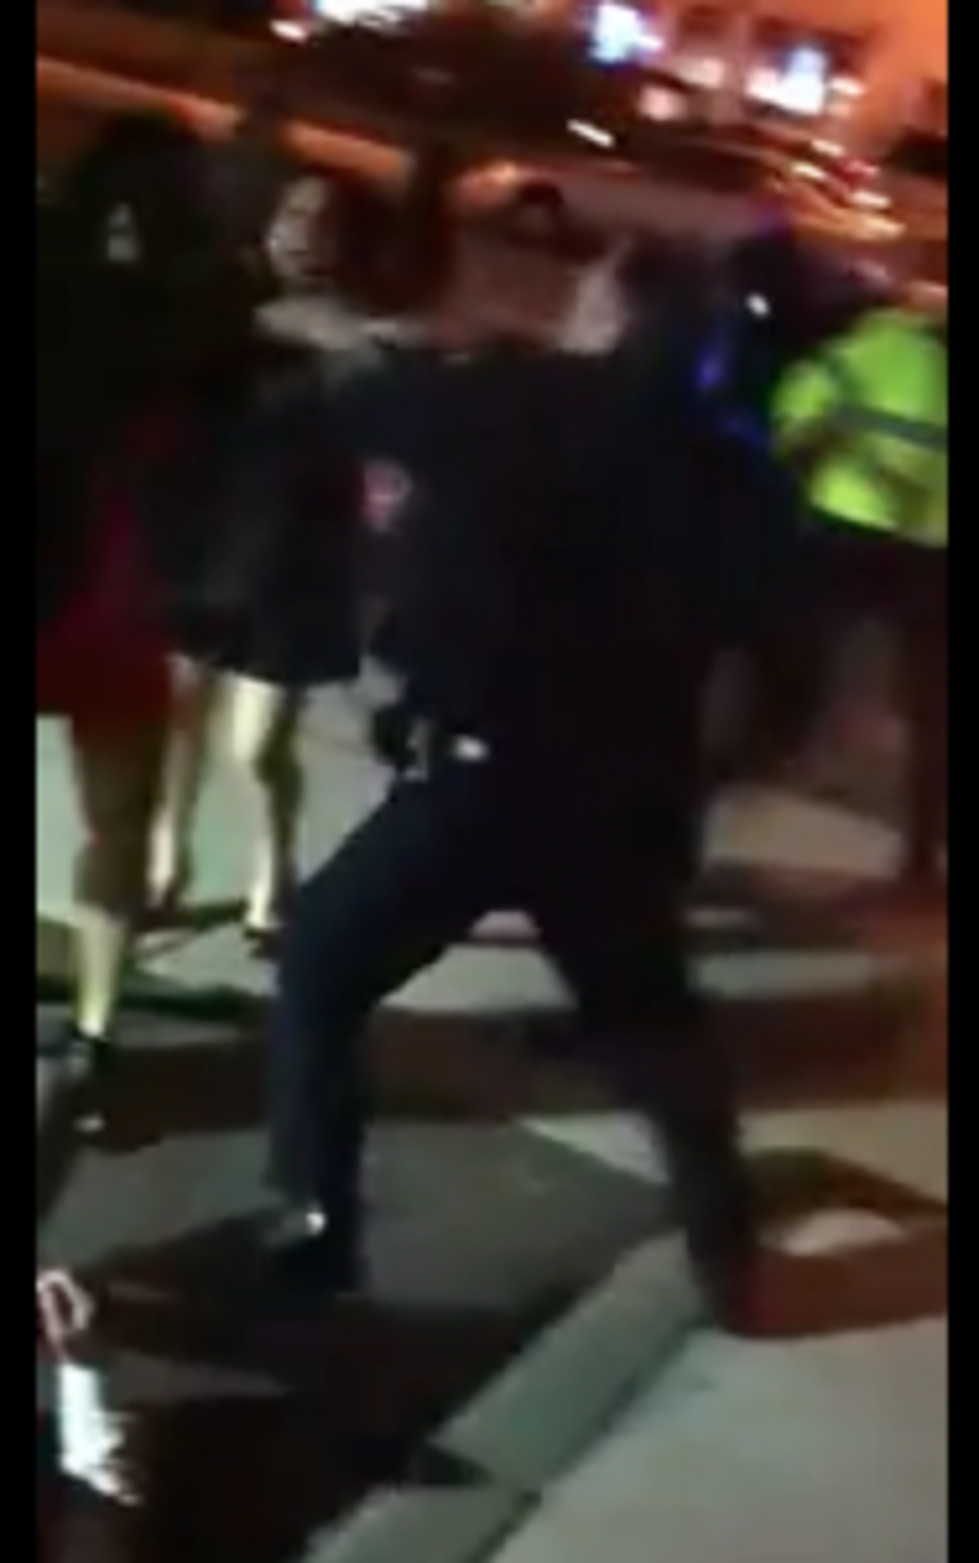 Elizabeth Cop Punches Woman Outside Nightclub Trying to Break Up Fight – Did He Do Anything Wrong? [VIDEO/NSFW]